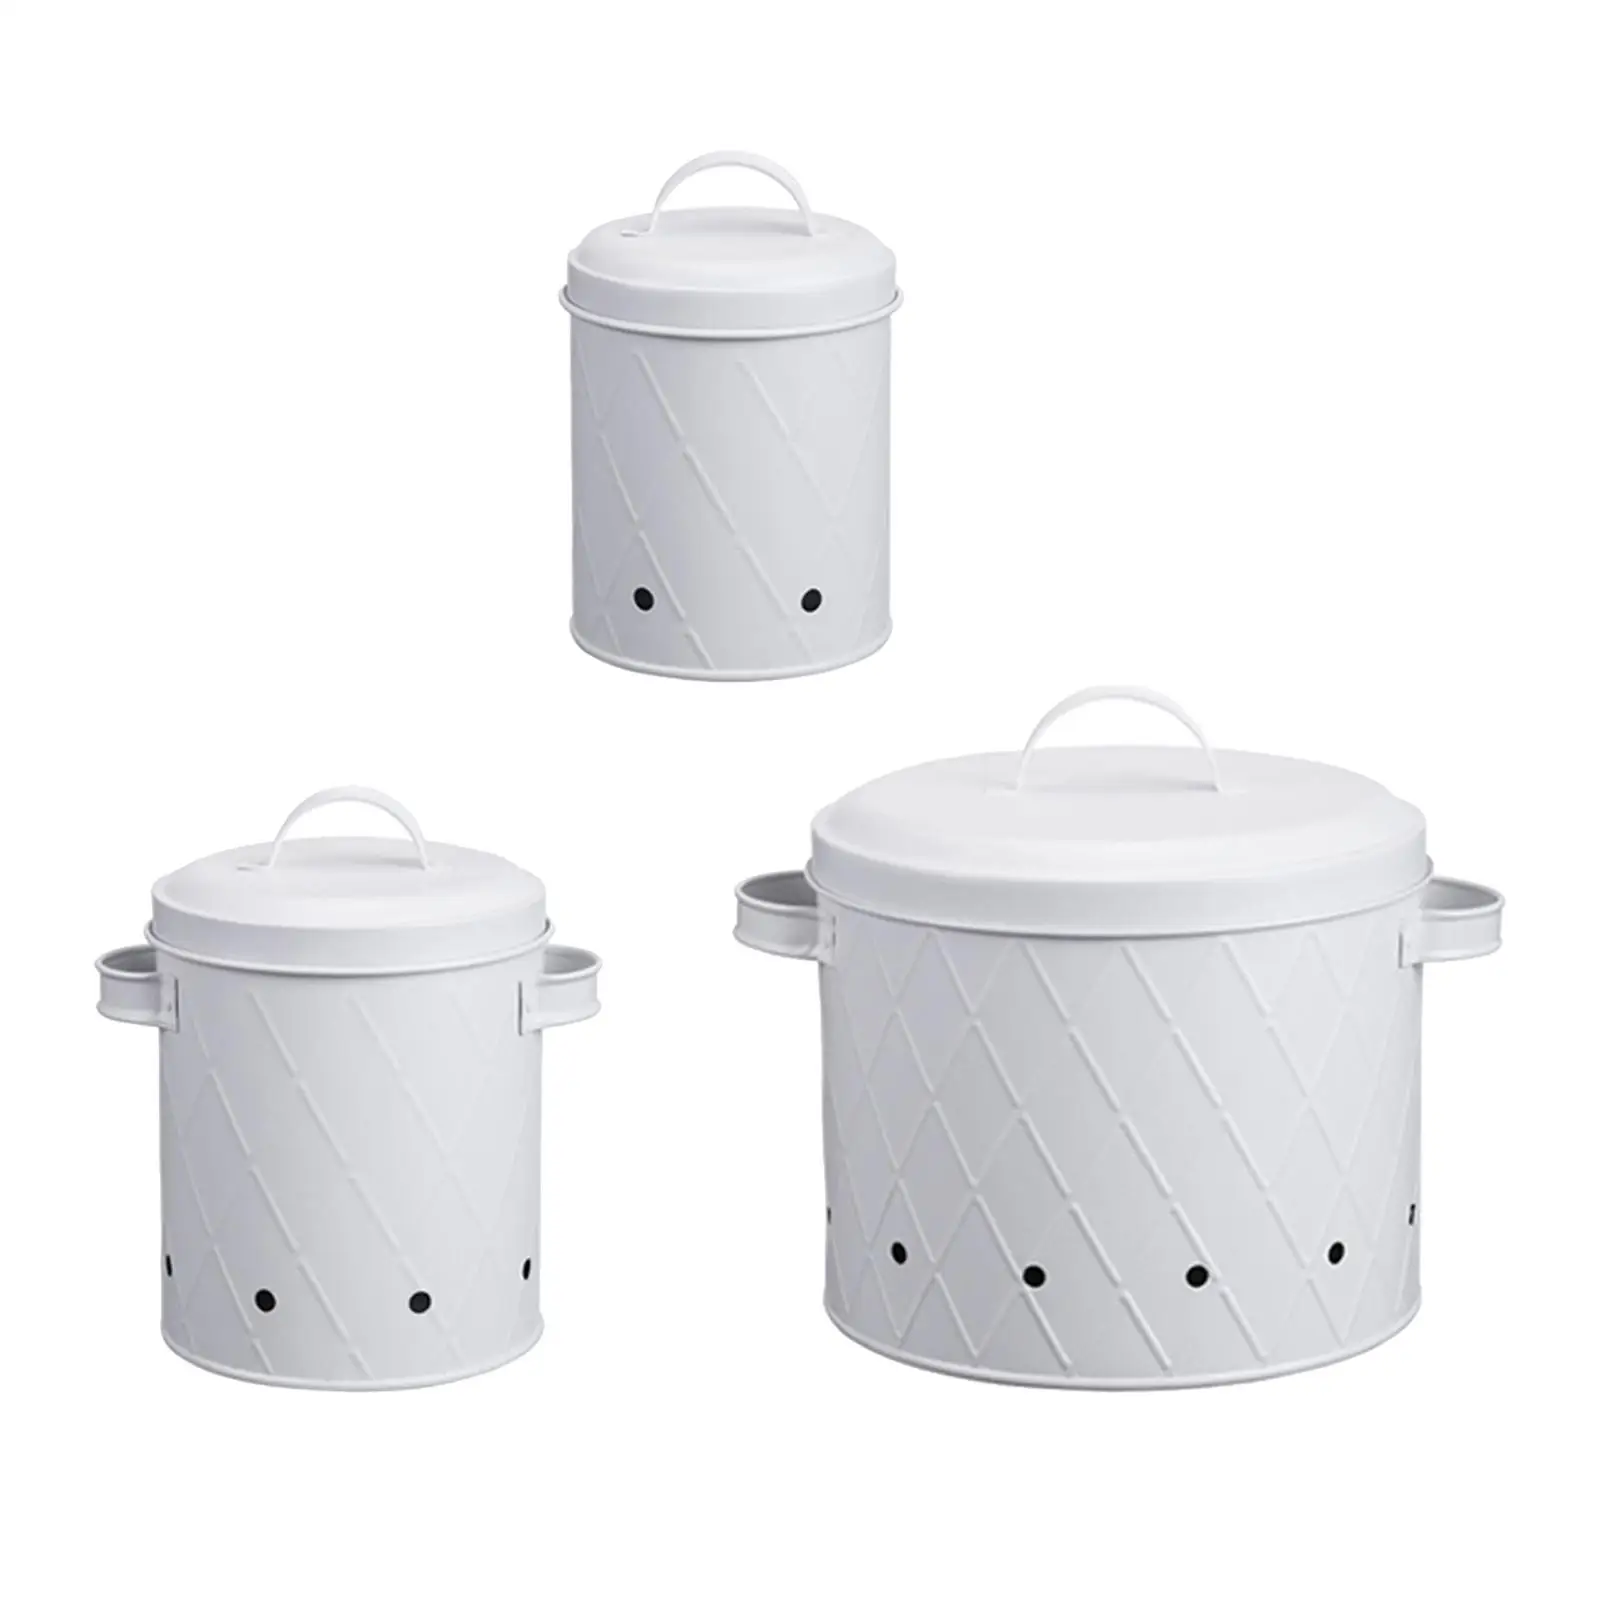 3Pcs Farmhouse Kitchen Canisters Set Pots Tins for Camping Picnic Countertop